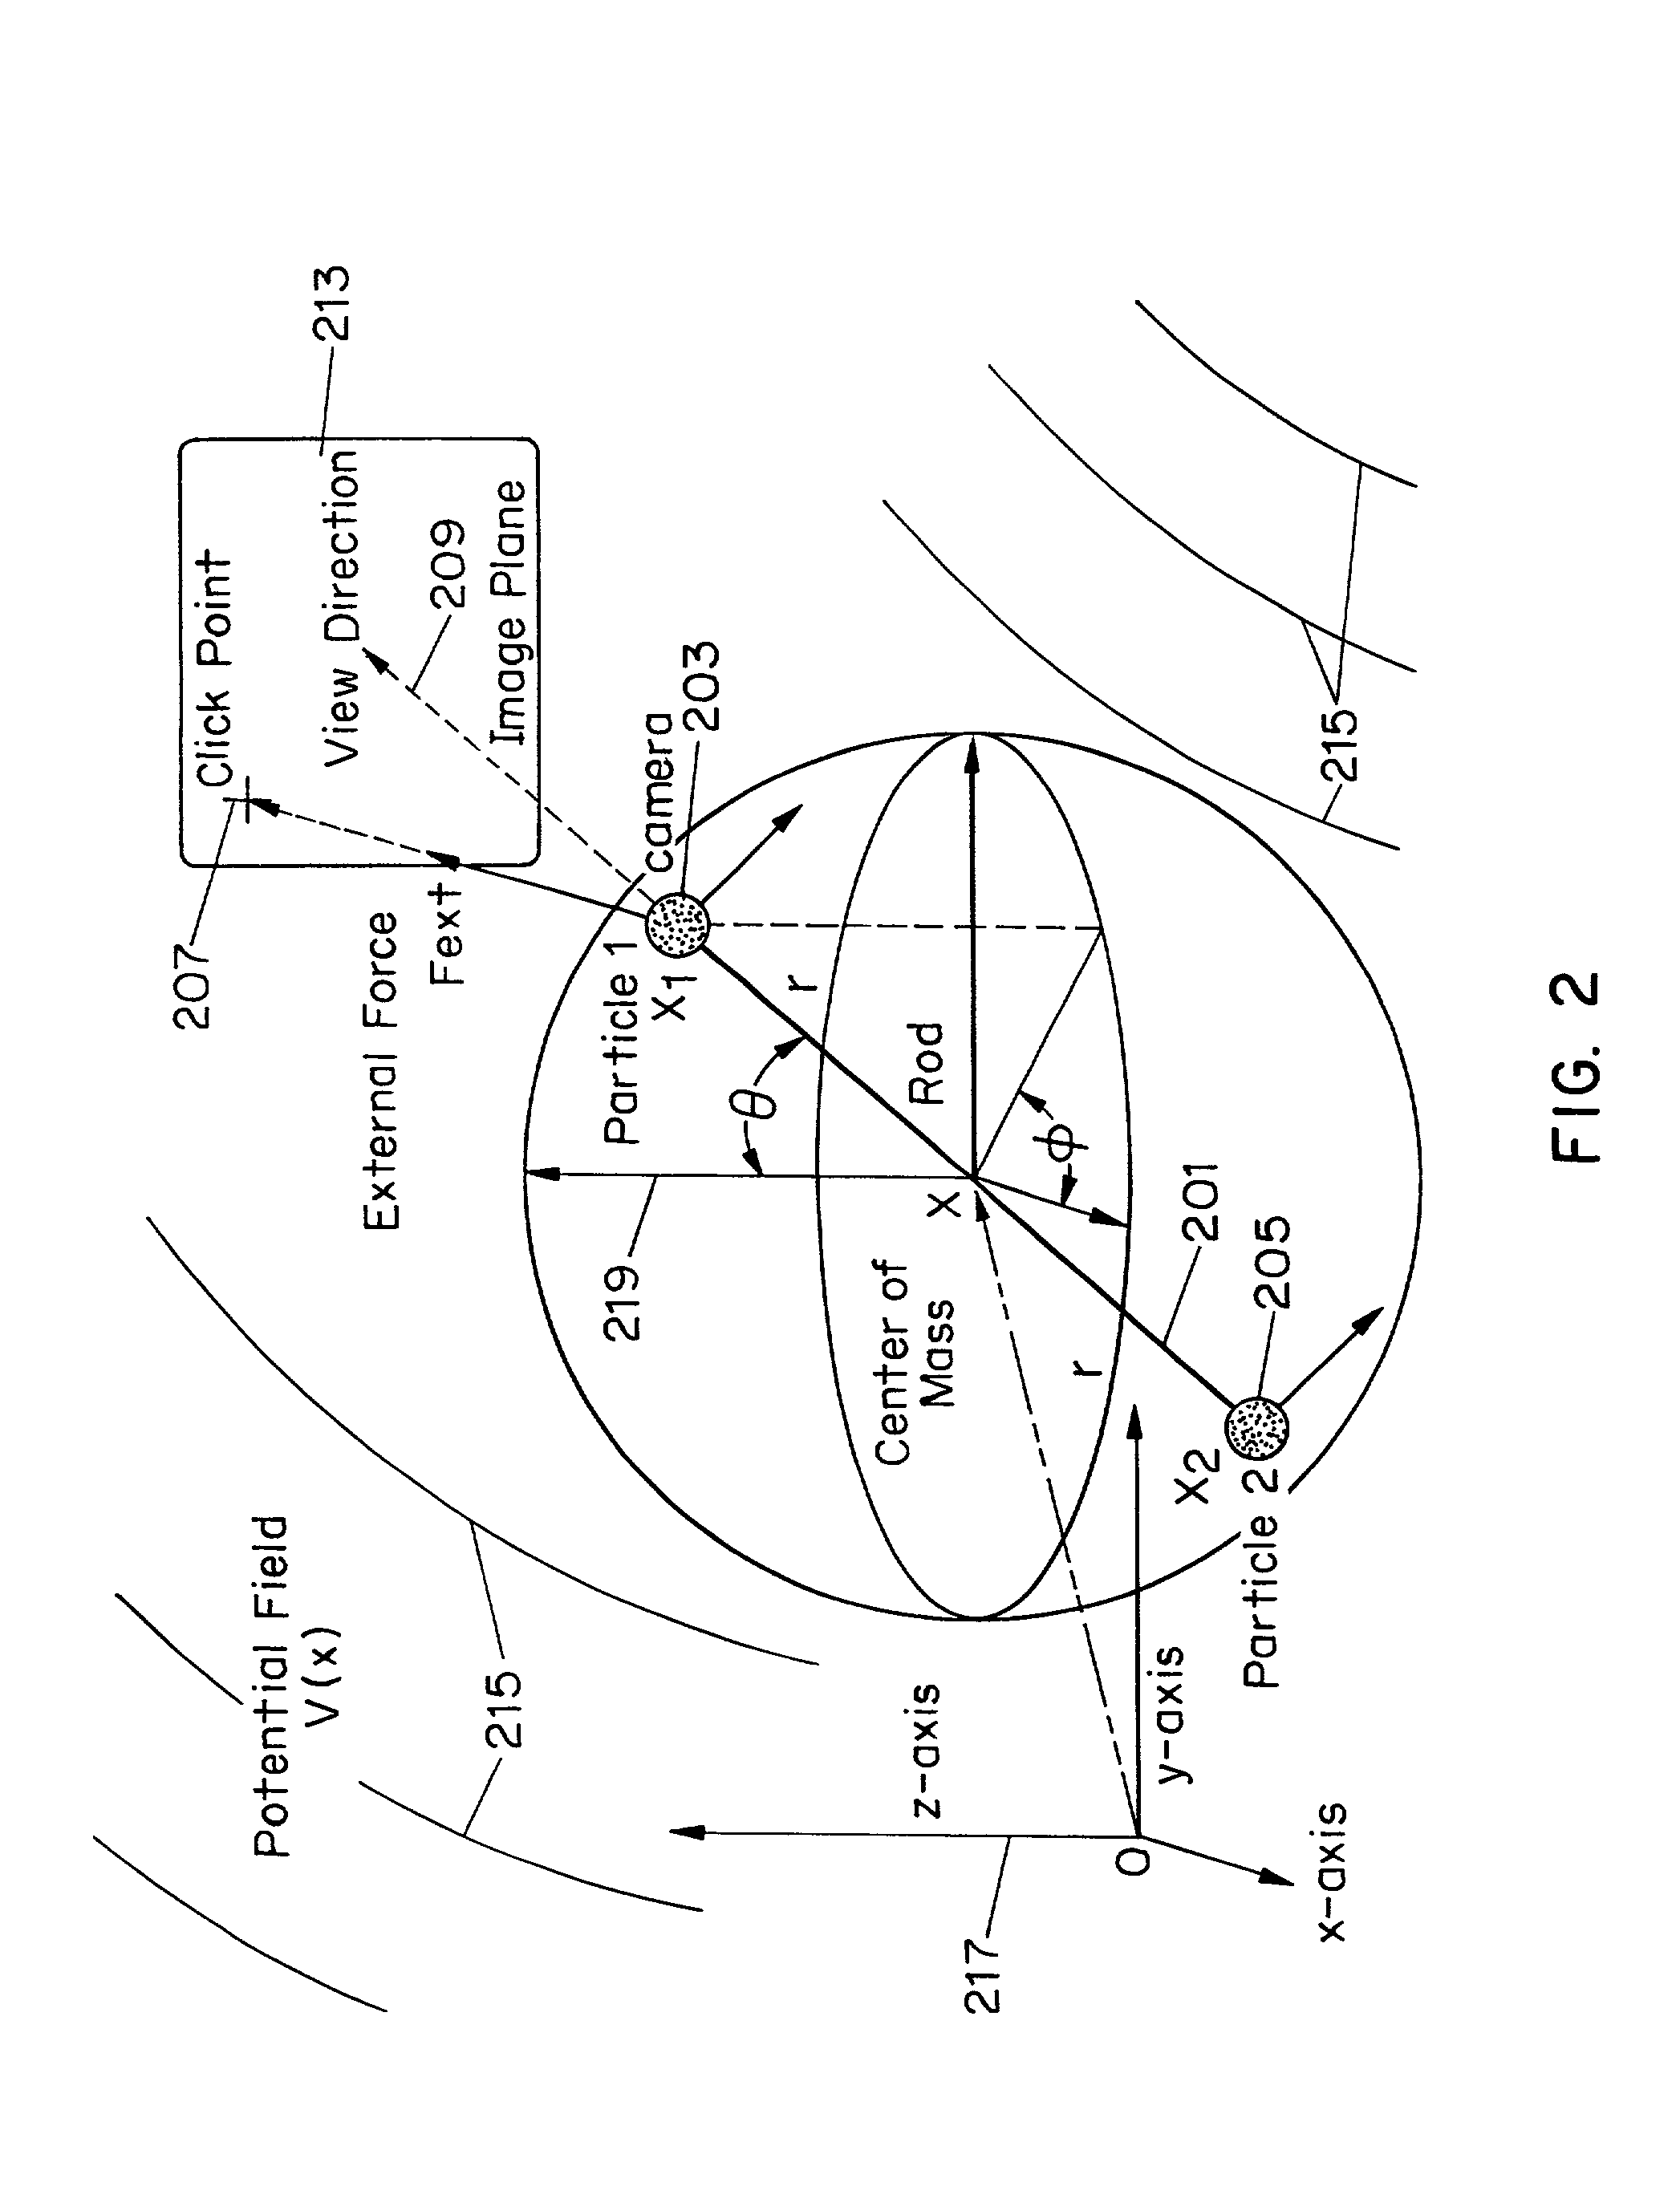 System and method for performing a three-dimensional virtual segmentation and examination with optical texture mapping